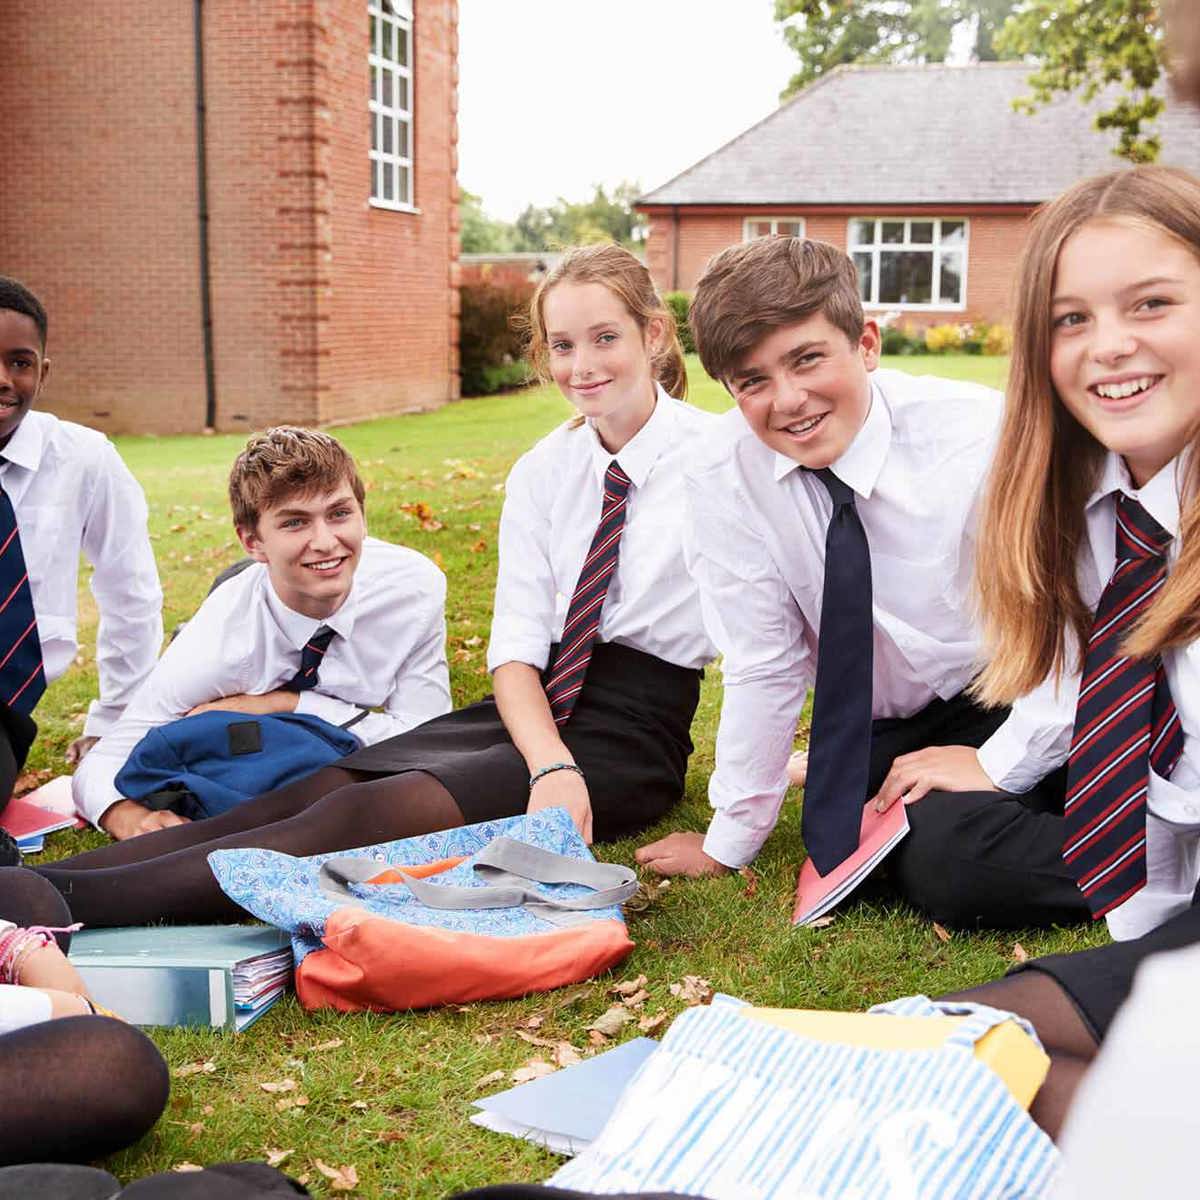 school-environment pupils learning outside on grass